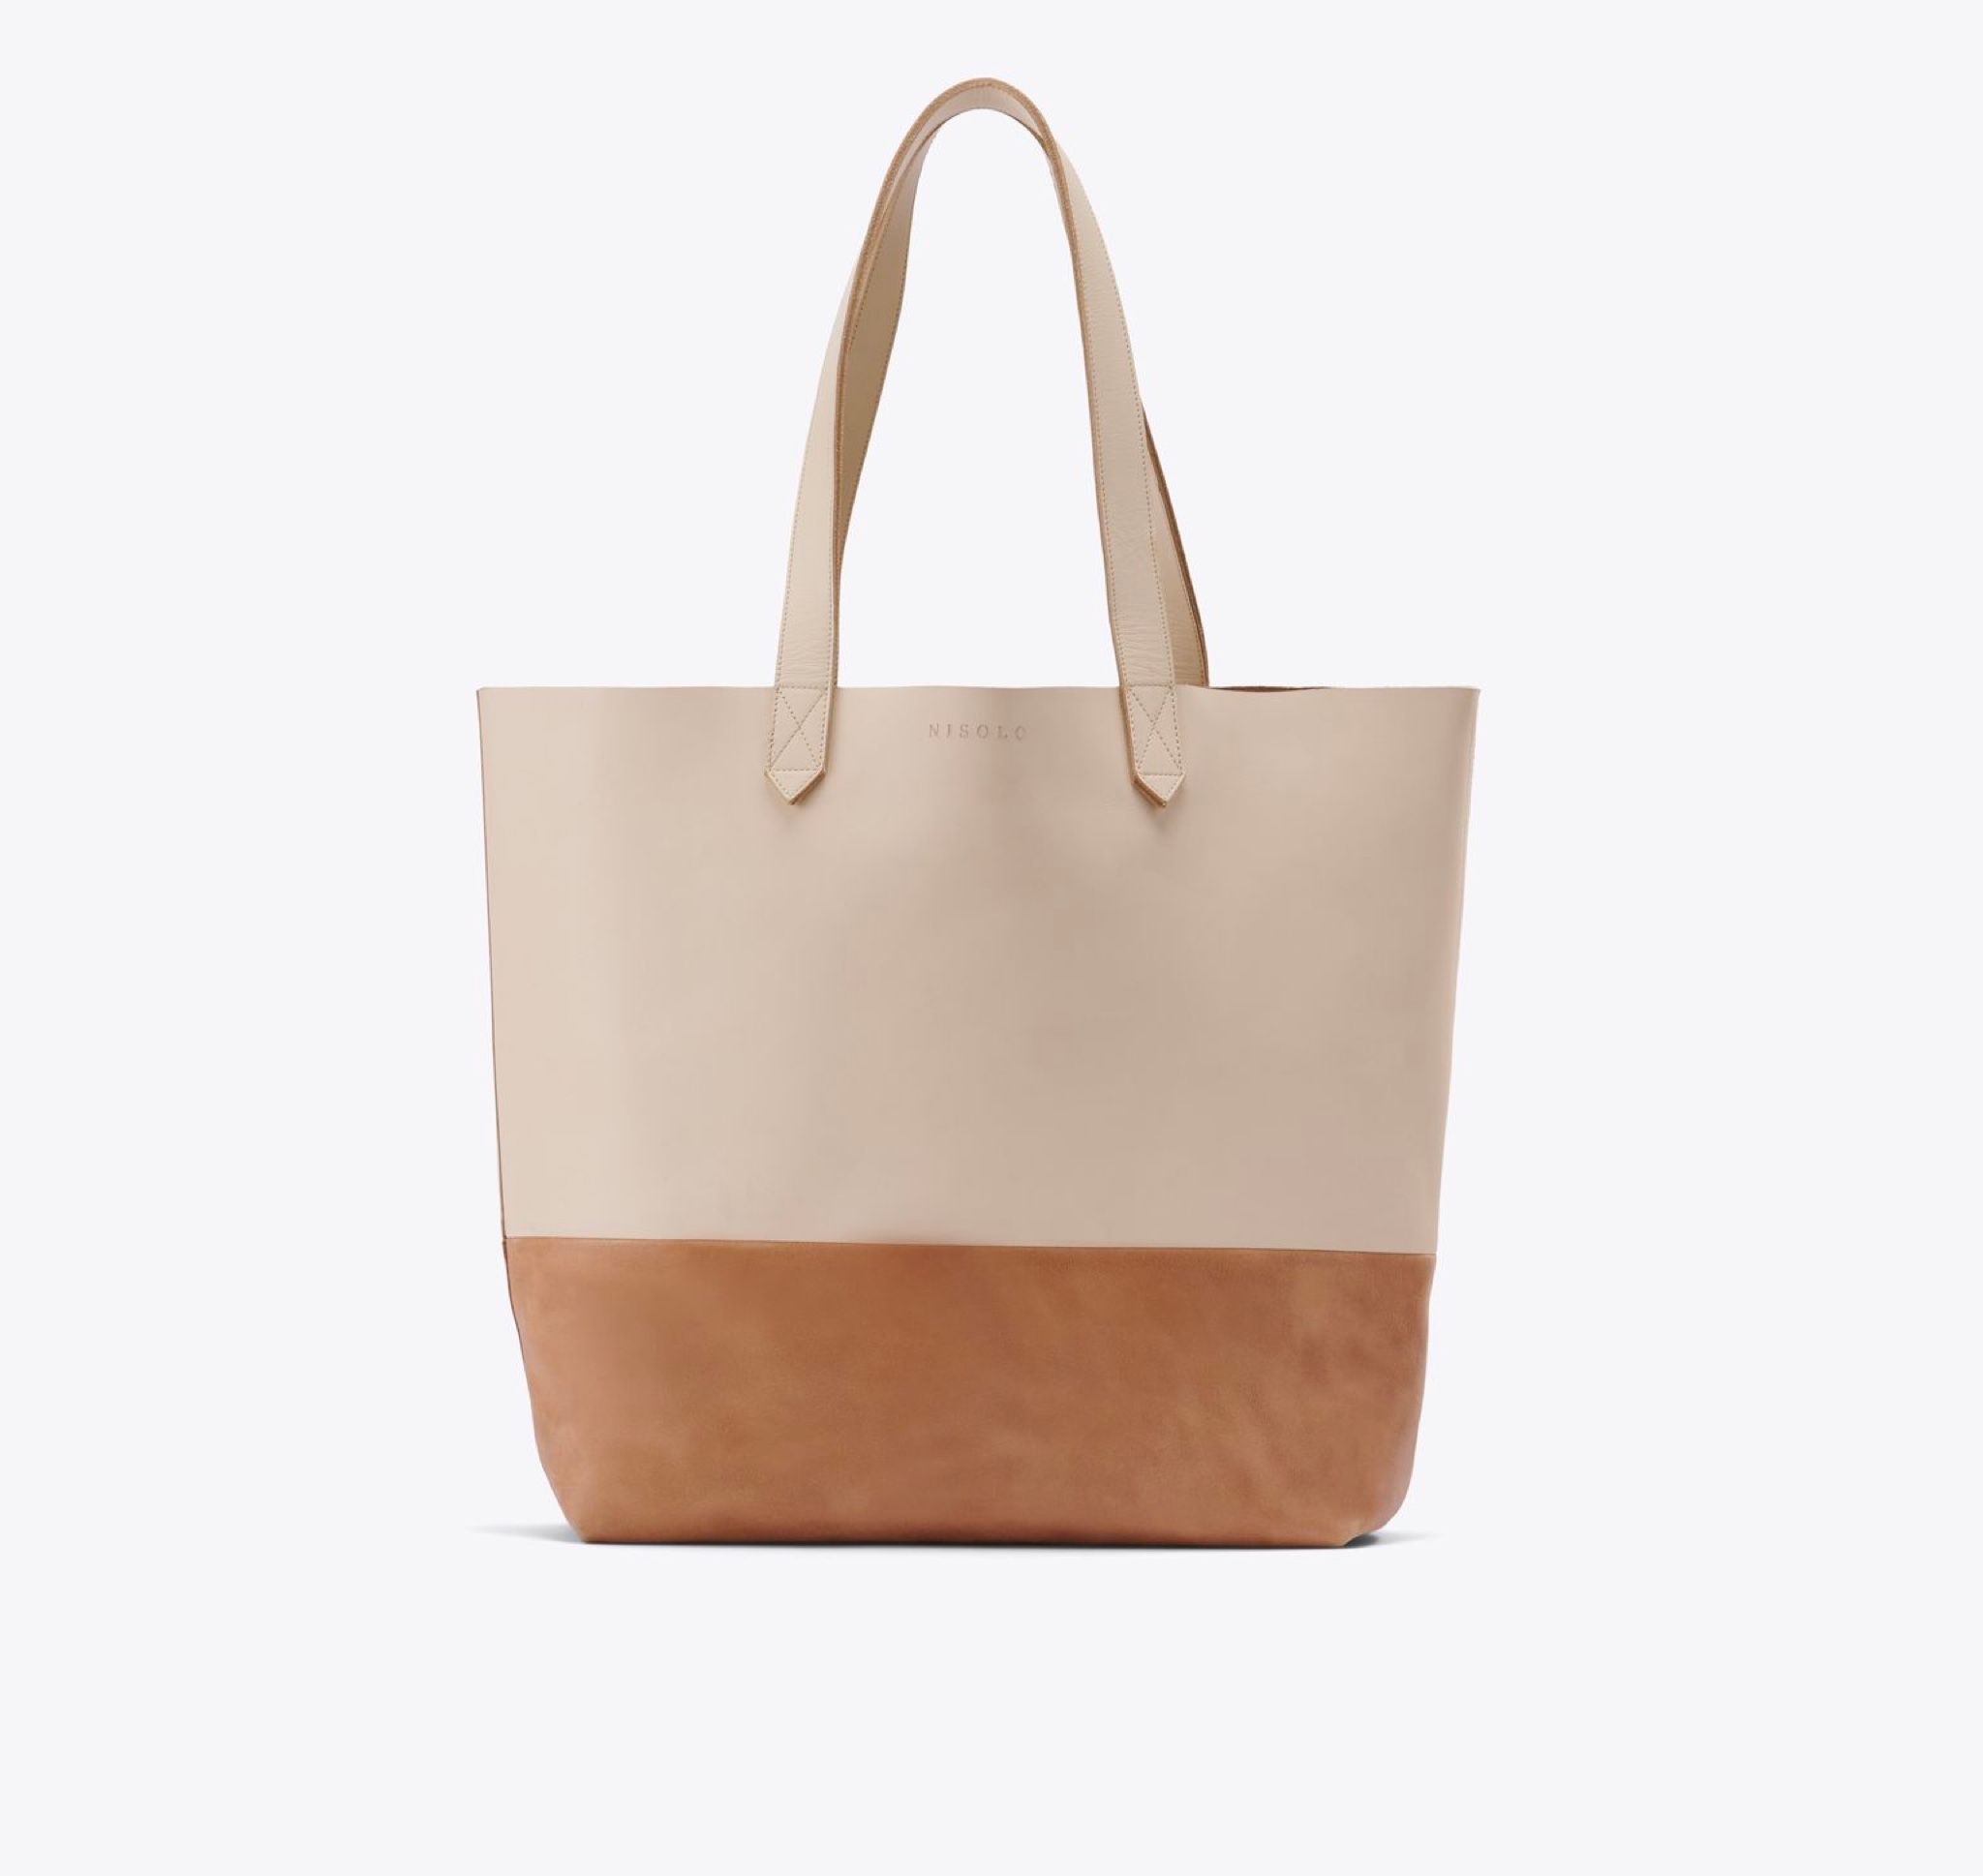 Nisolo Lori Tote Bone/Almond - Every Nisolo product is built on the foundation of comfort, function, and design. 